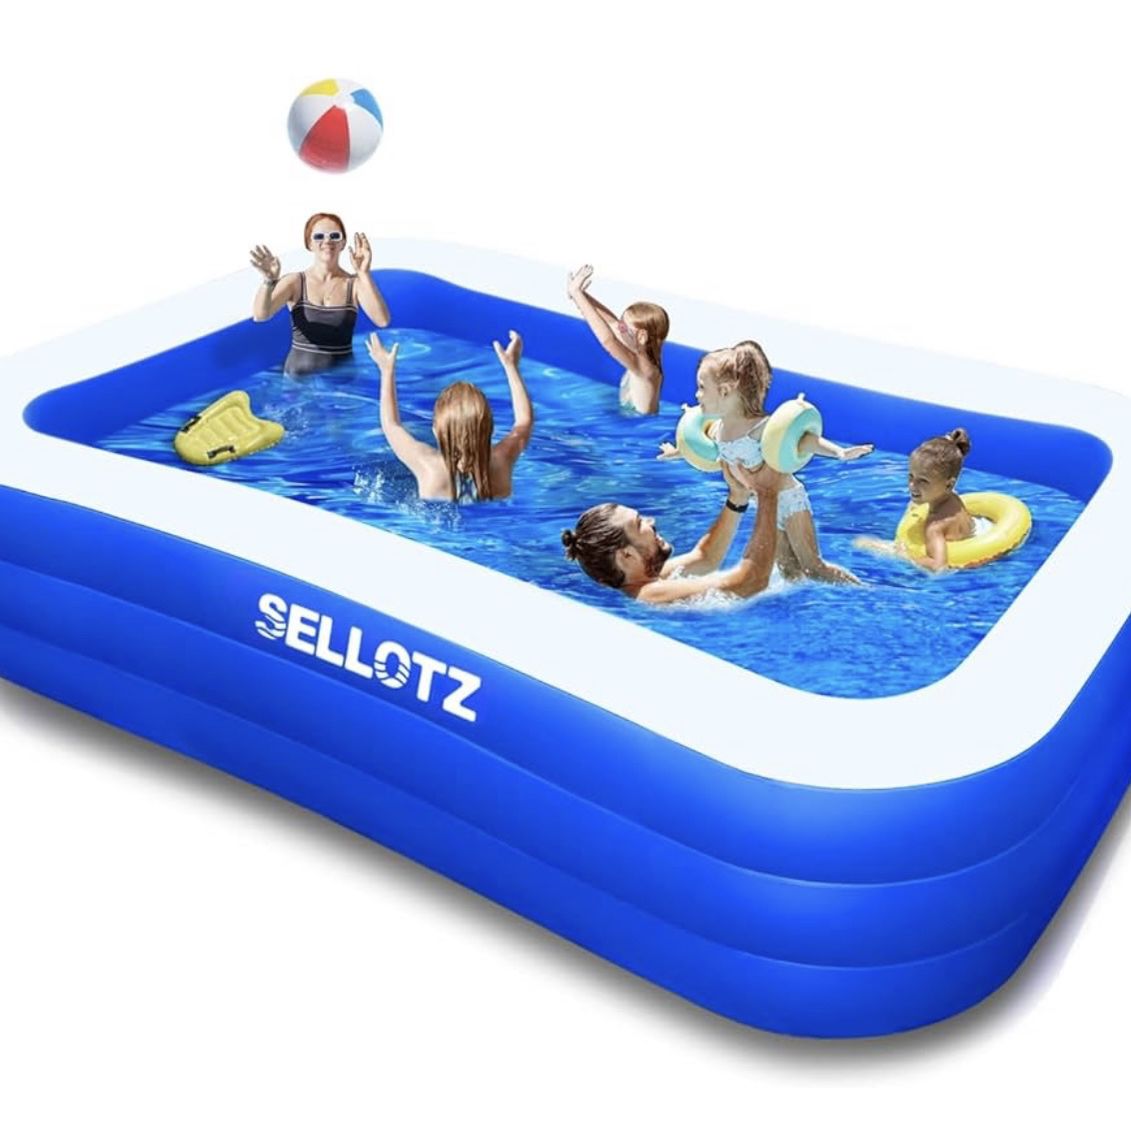 SELLOTZ Inflatable Pool for Kids and Adults, 120" X 72" X 22" Oversized Thickened Family Swimming Pool for Toddlers, Outdoor, Garden, Backyard, Summer